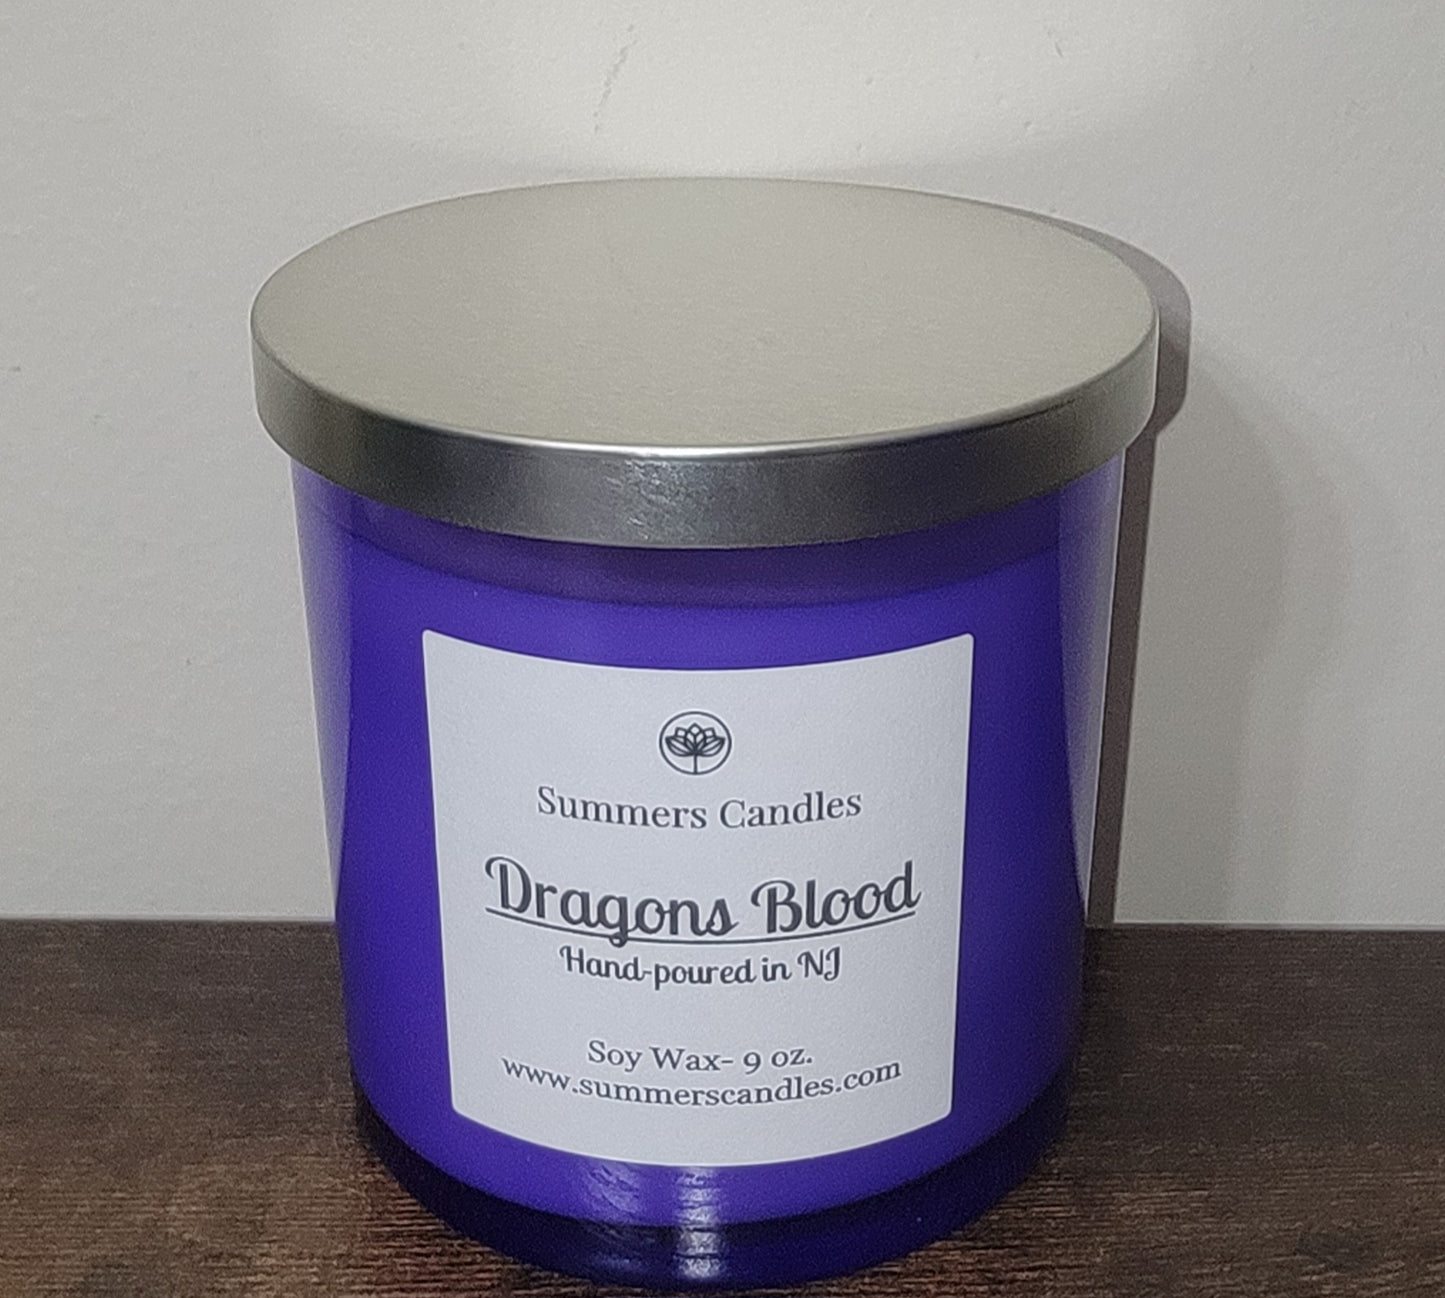 Dragons Blood- Summers Candles 